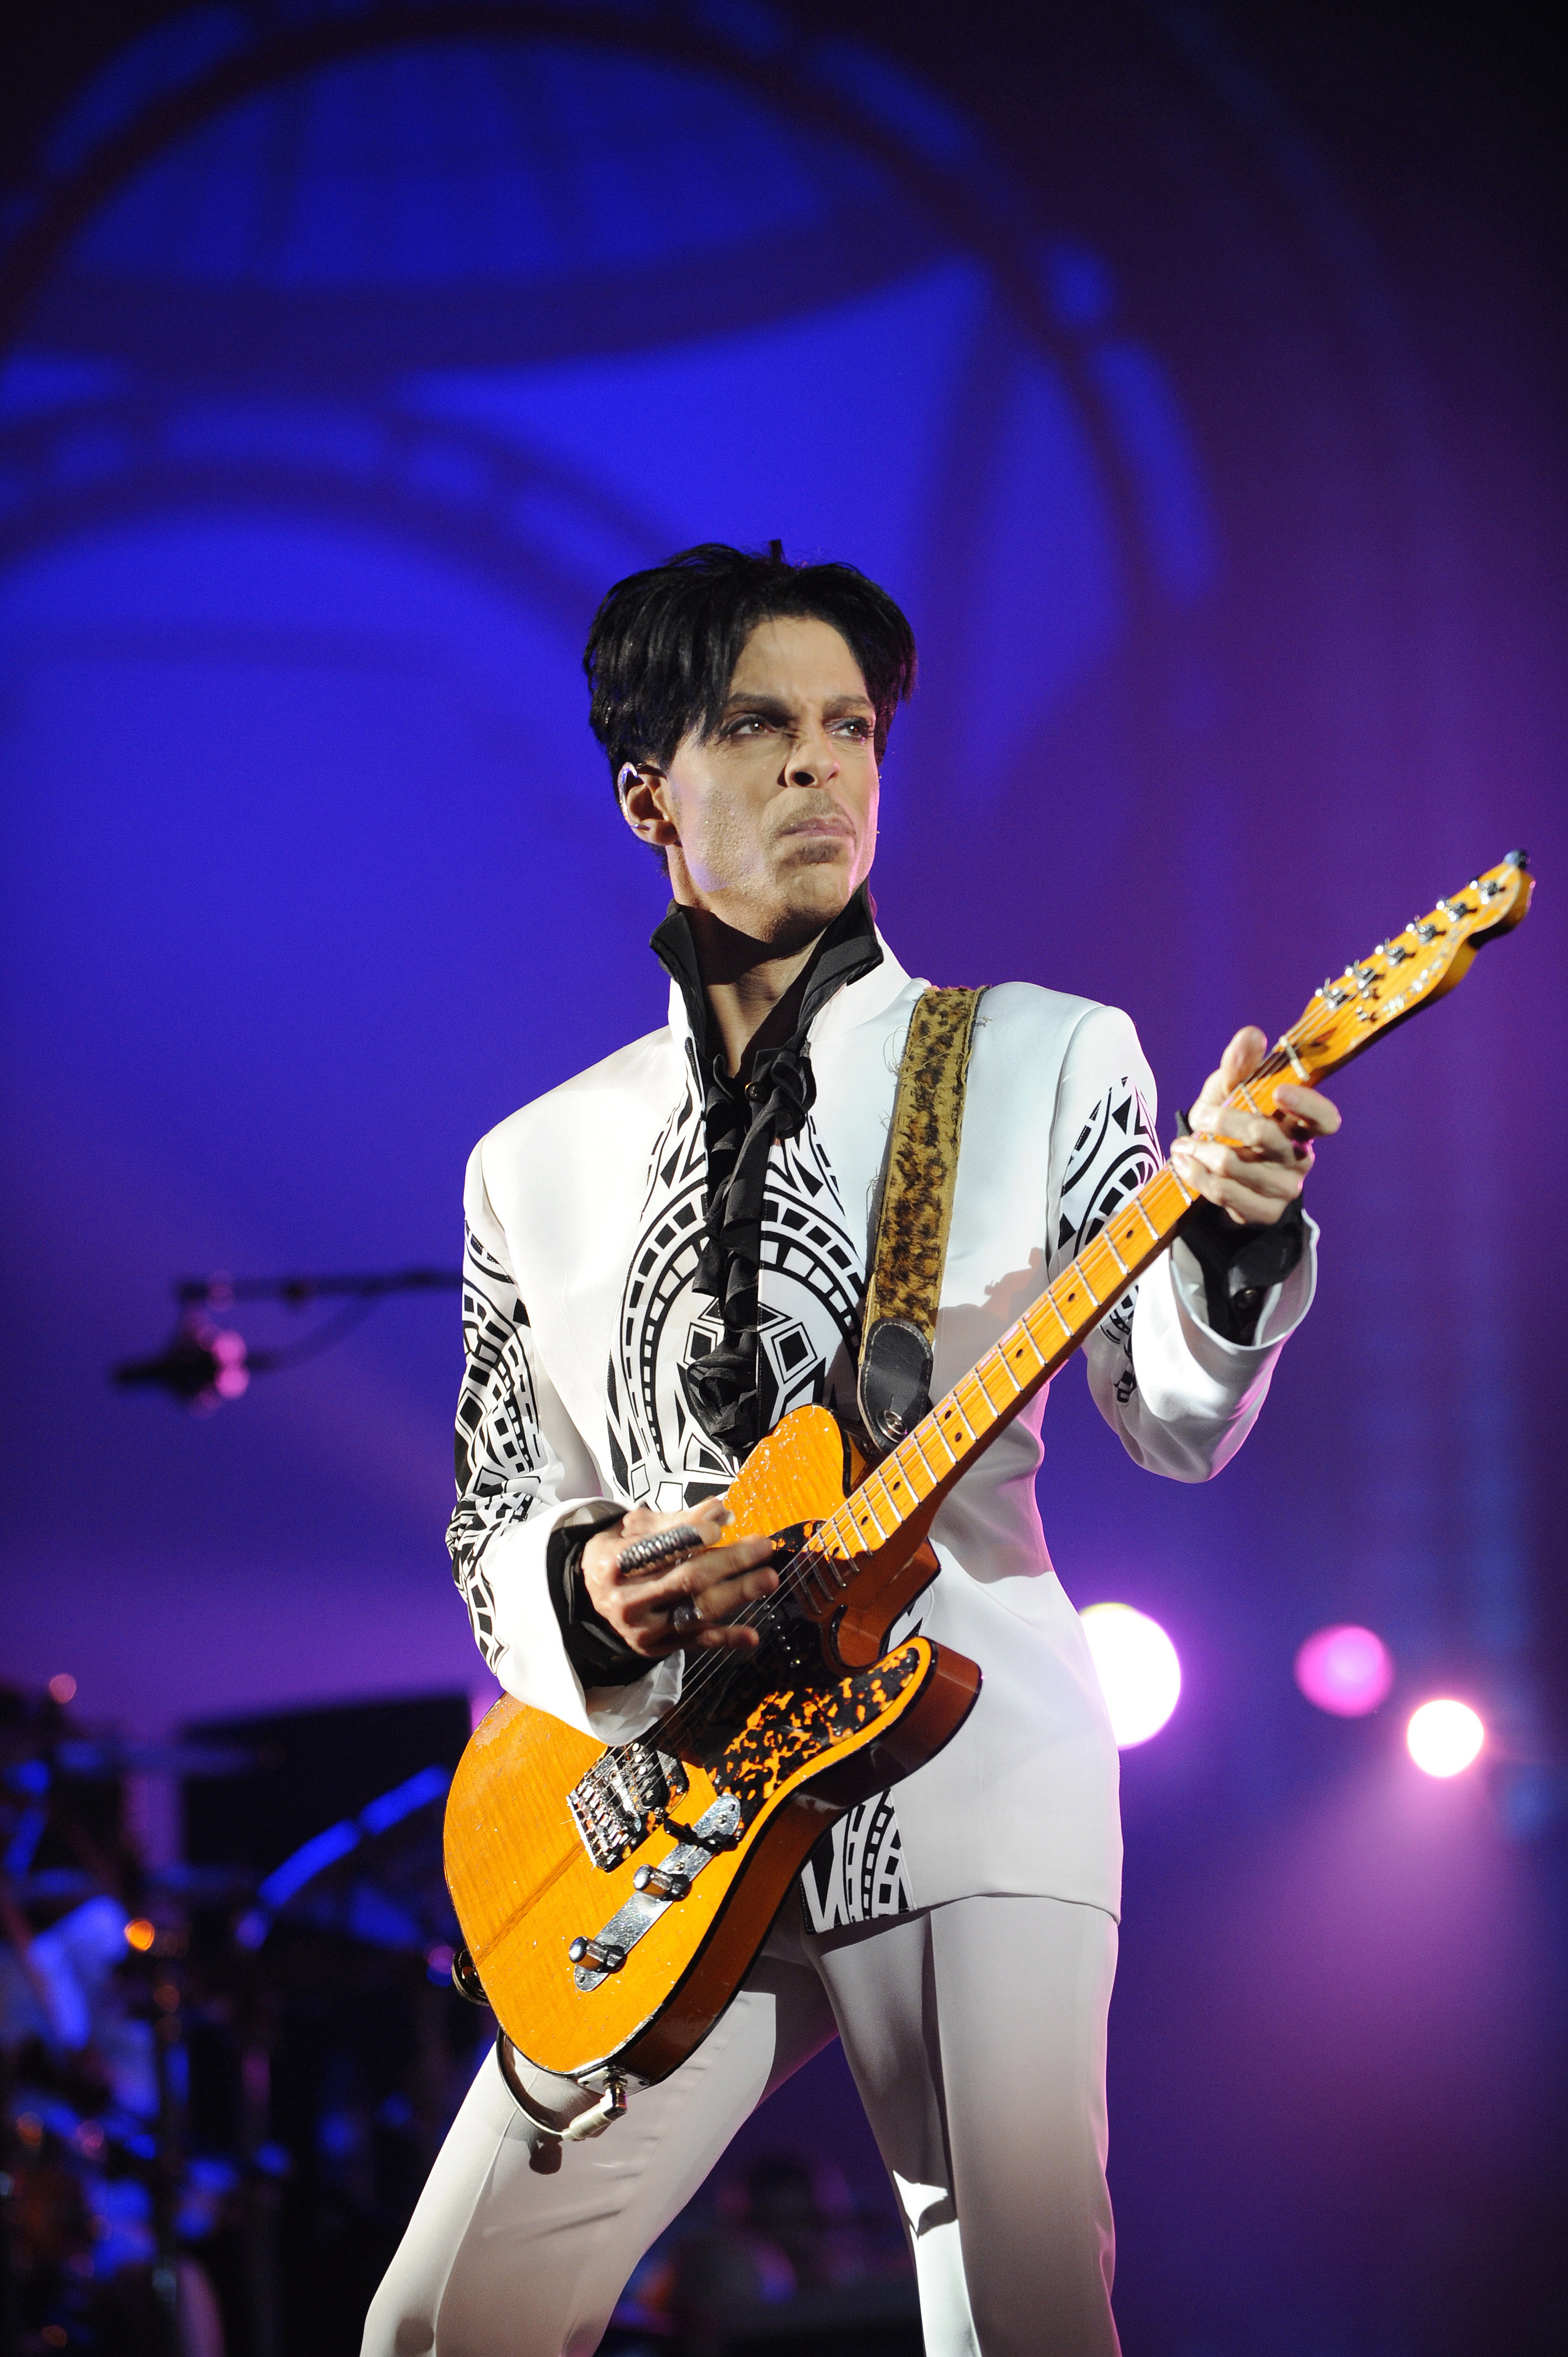 Prince performs at the Grand Palais in Paris, France on October 11, 2009 | Source: Getty Images